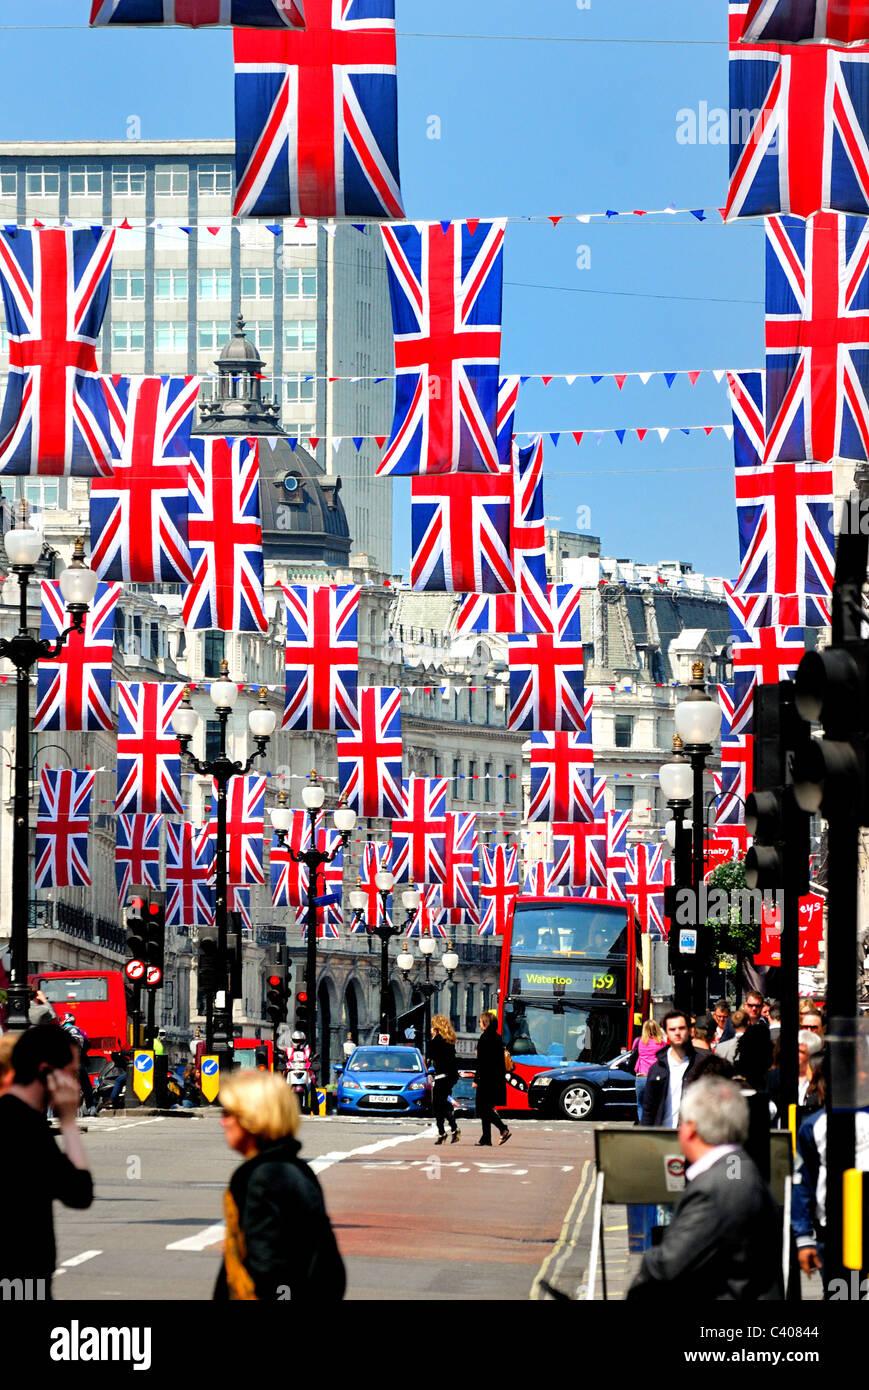 Regent street London decorated for the royal wedding with union jack flags Stock Photo